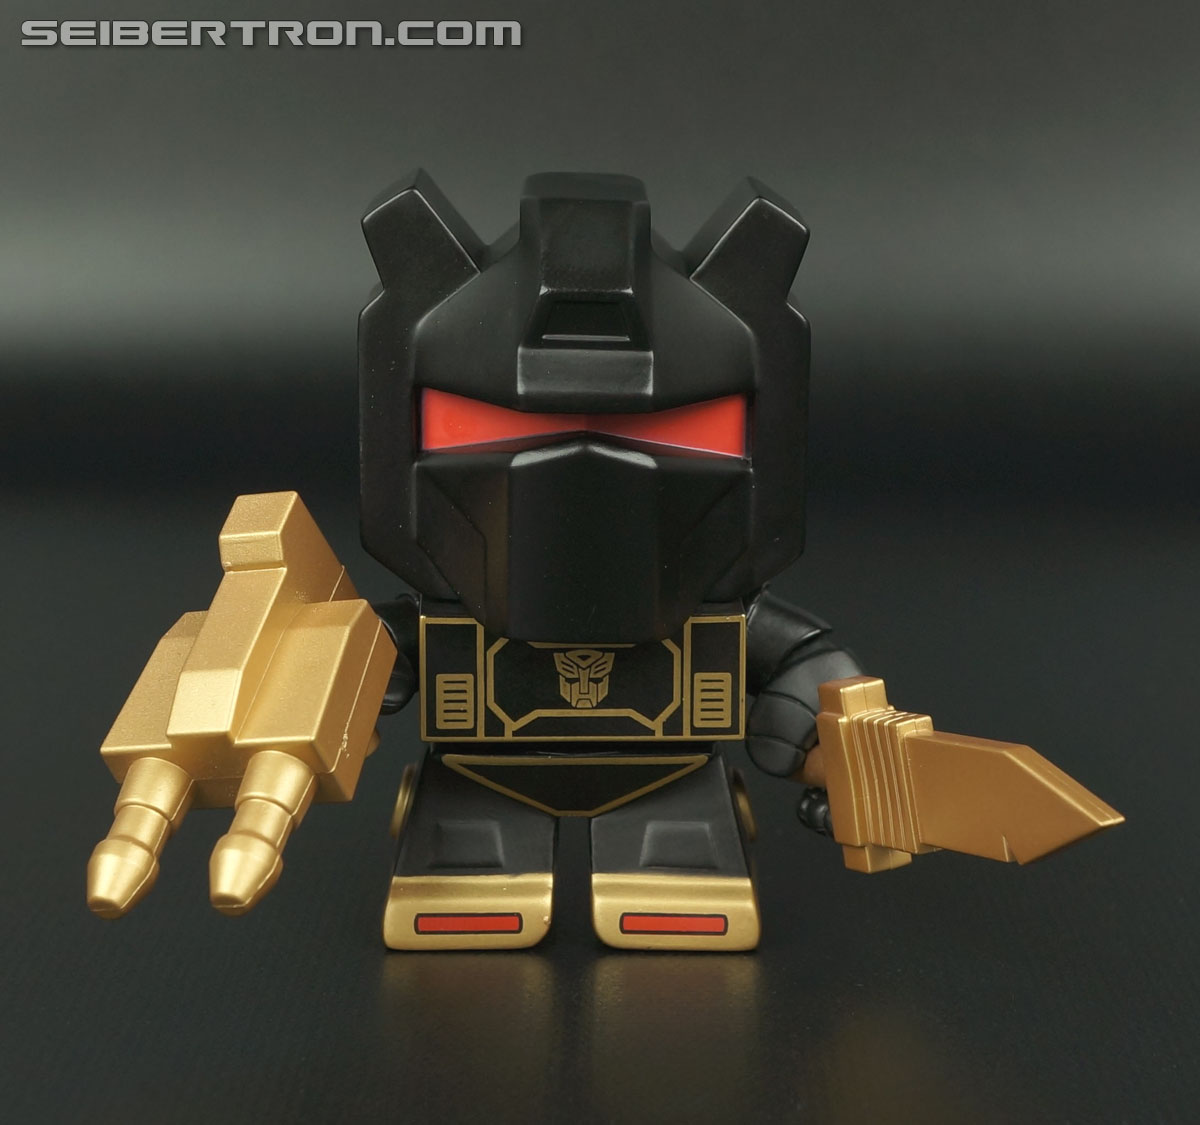 Transformers Loyal Subjects Grimlock (Cybertron Edition) (Image #1 of 32)